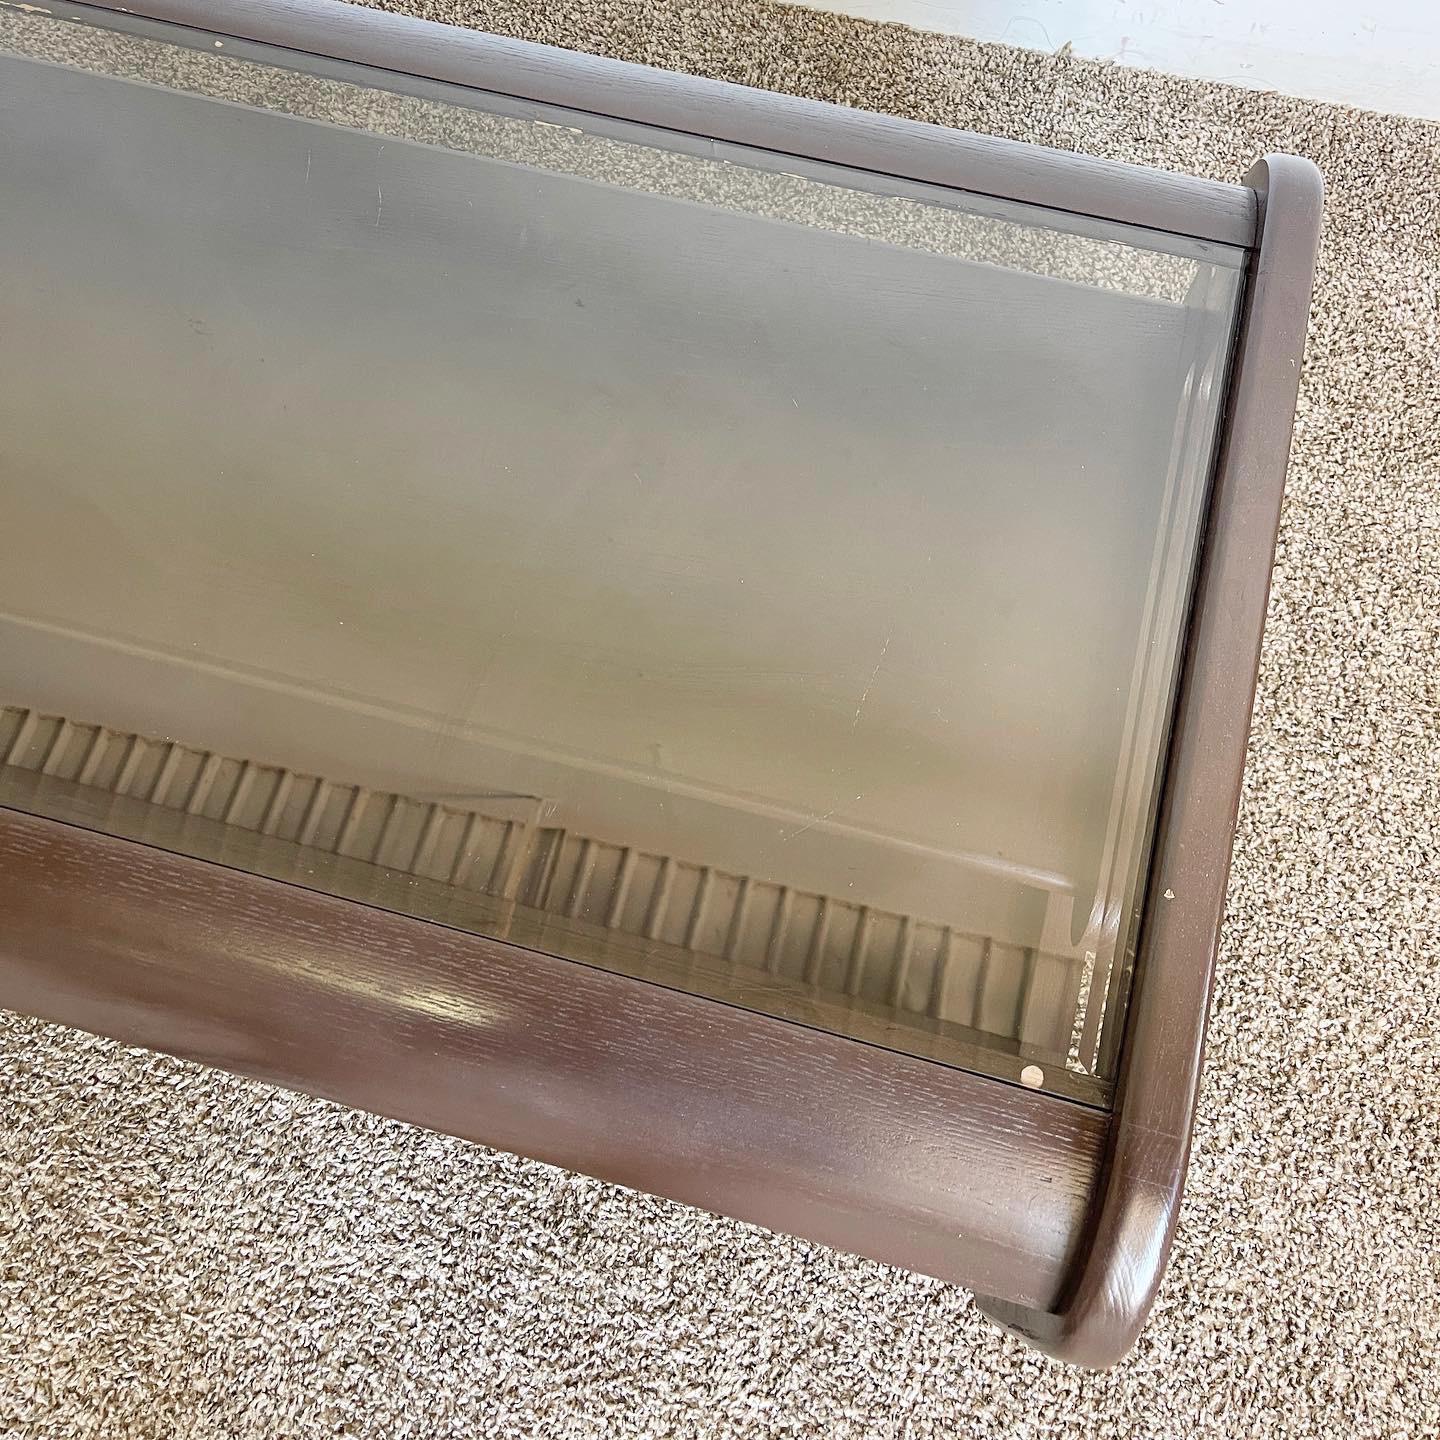 Experience timeless elegance with our Mid Century Modern Lou Hodges Style Coffee Table. With its clean lines, painted brown finish, and ample tabletop, this coffee table captures the iconic mid-century modern aesthetic.

Inspired by renowned